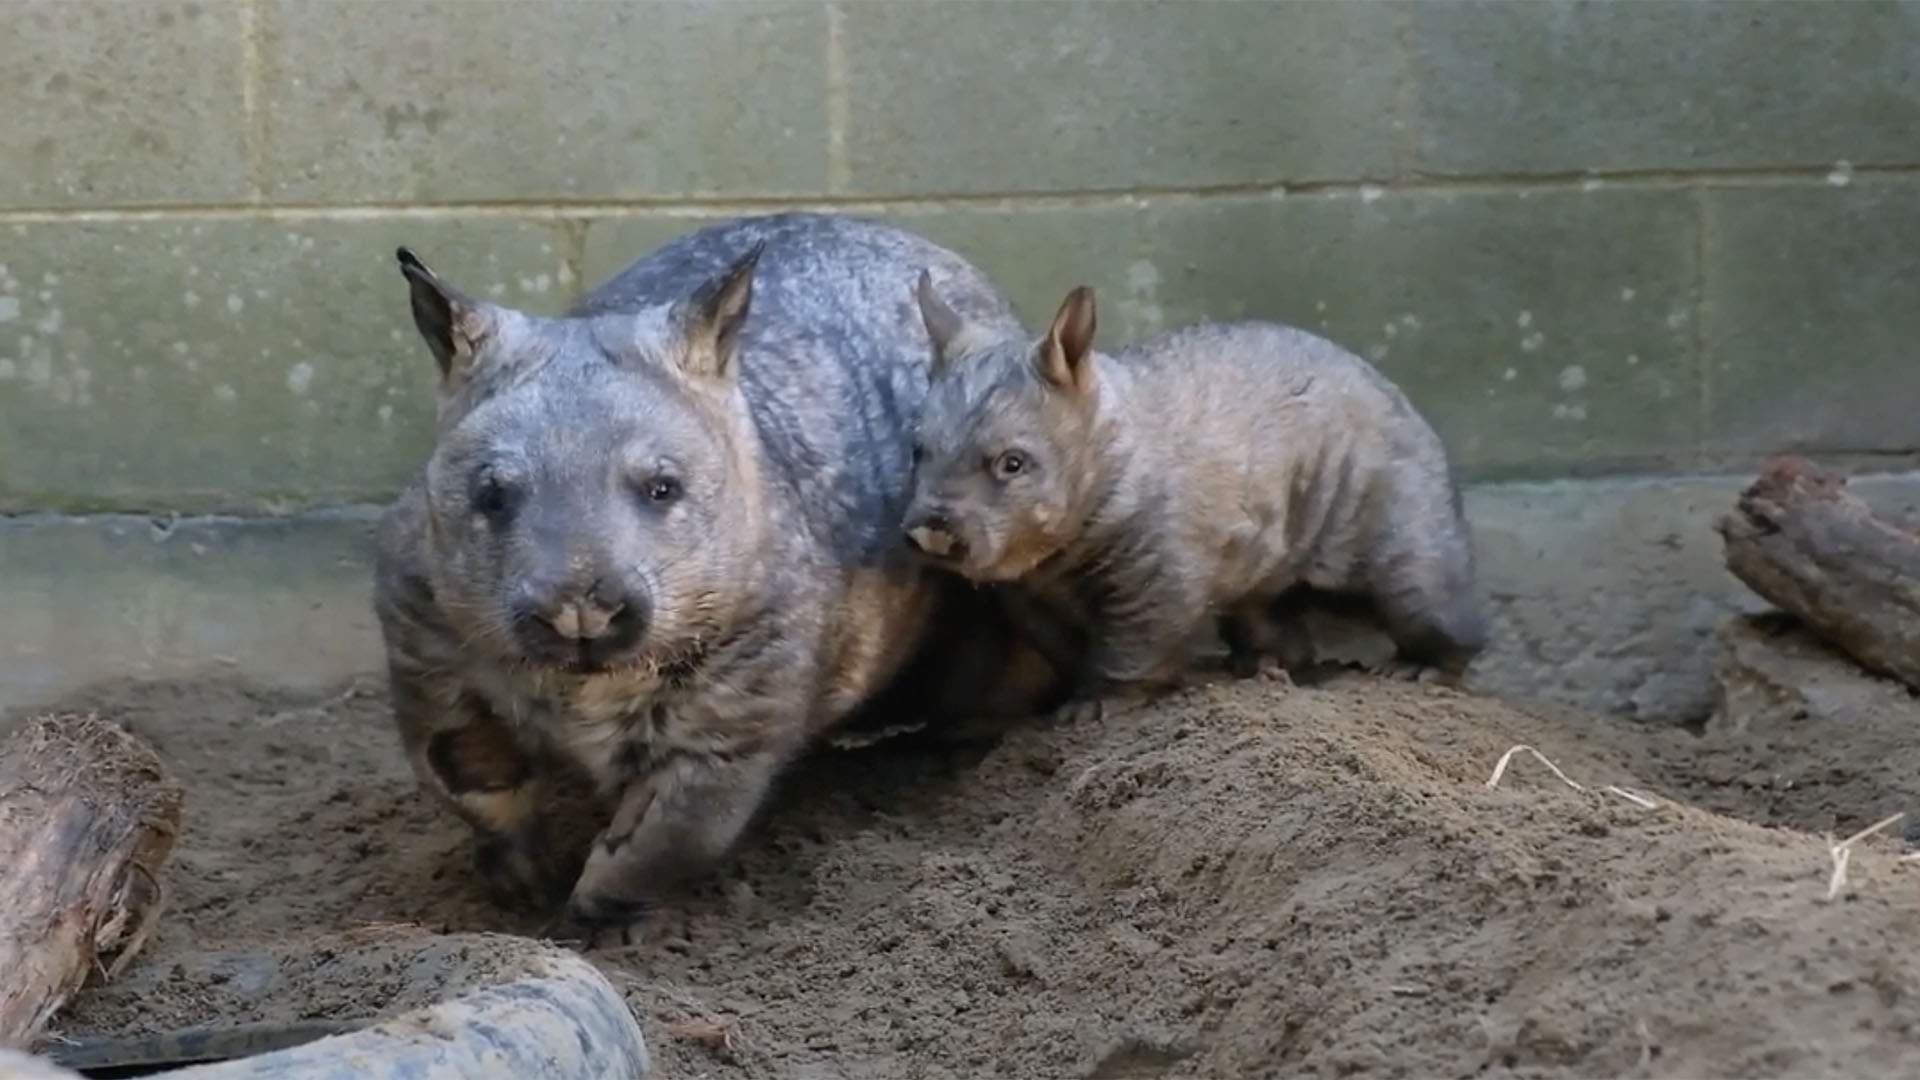 Taronga Zoo Has Welcomed a New Southern Hairy-Nosed Wombat Joey and It's As Adorable As You'd Expect